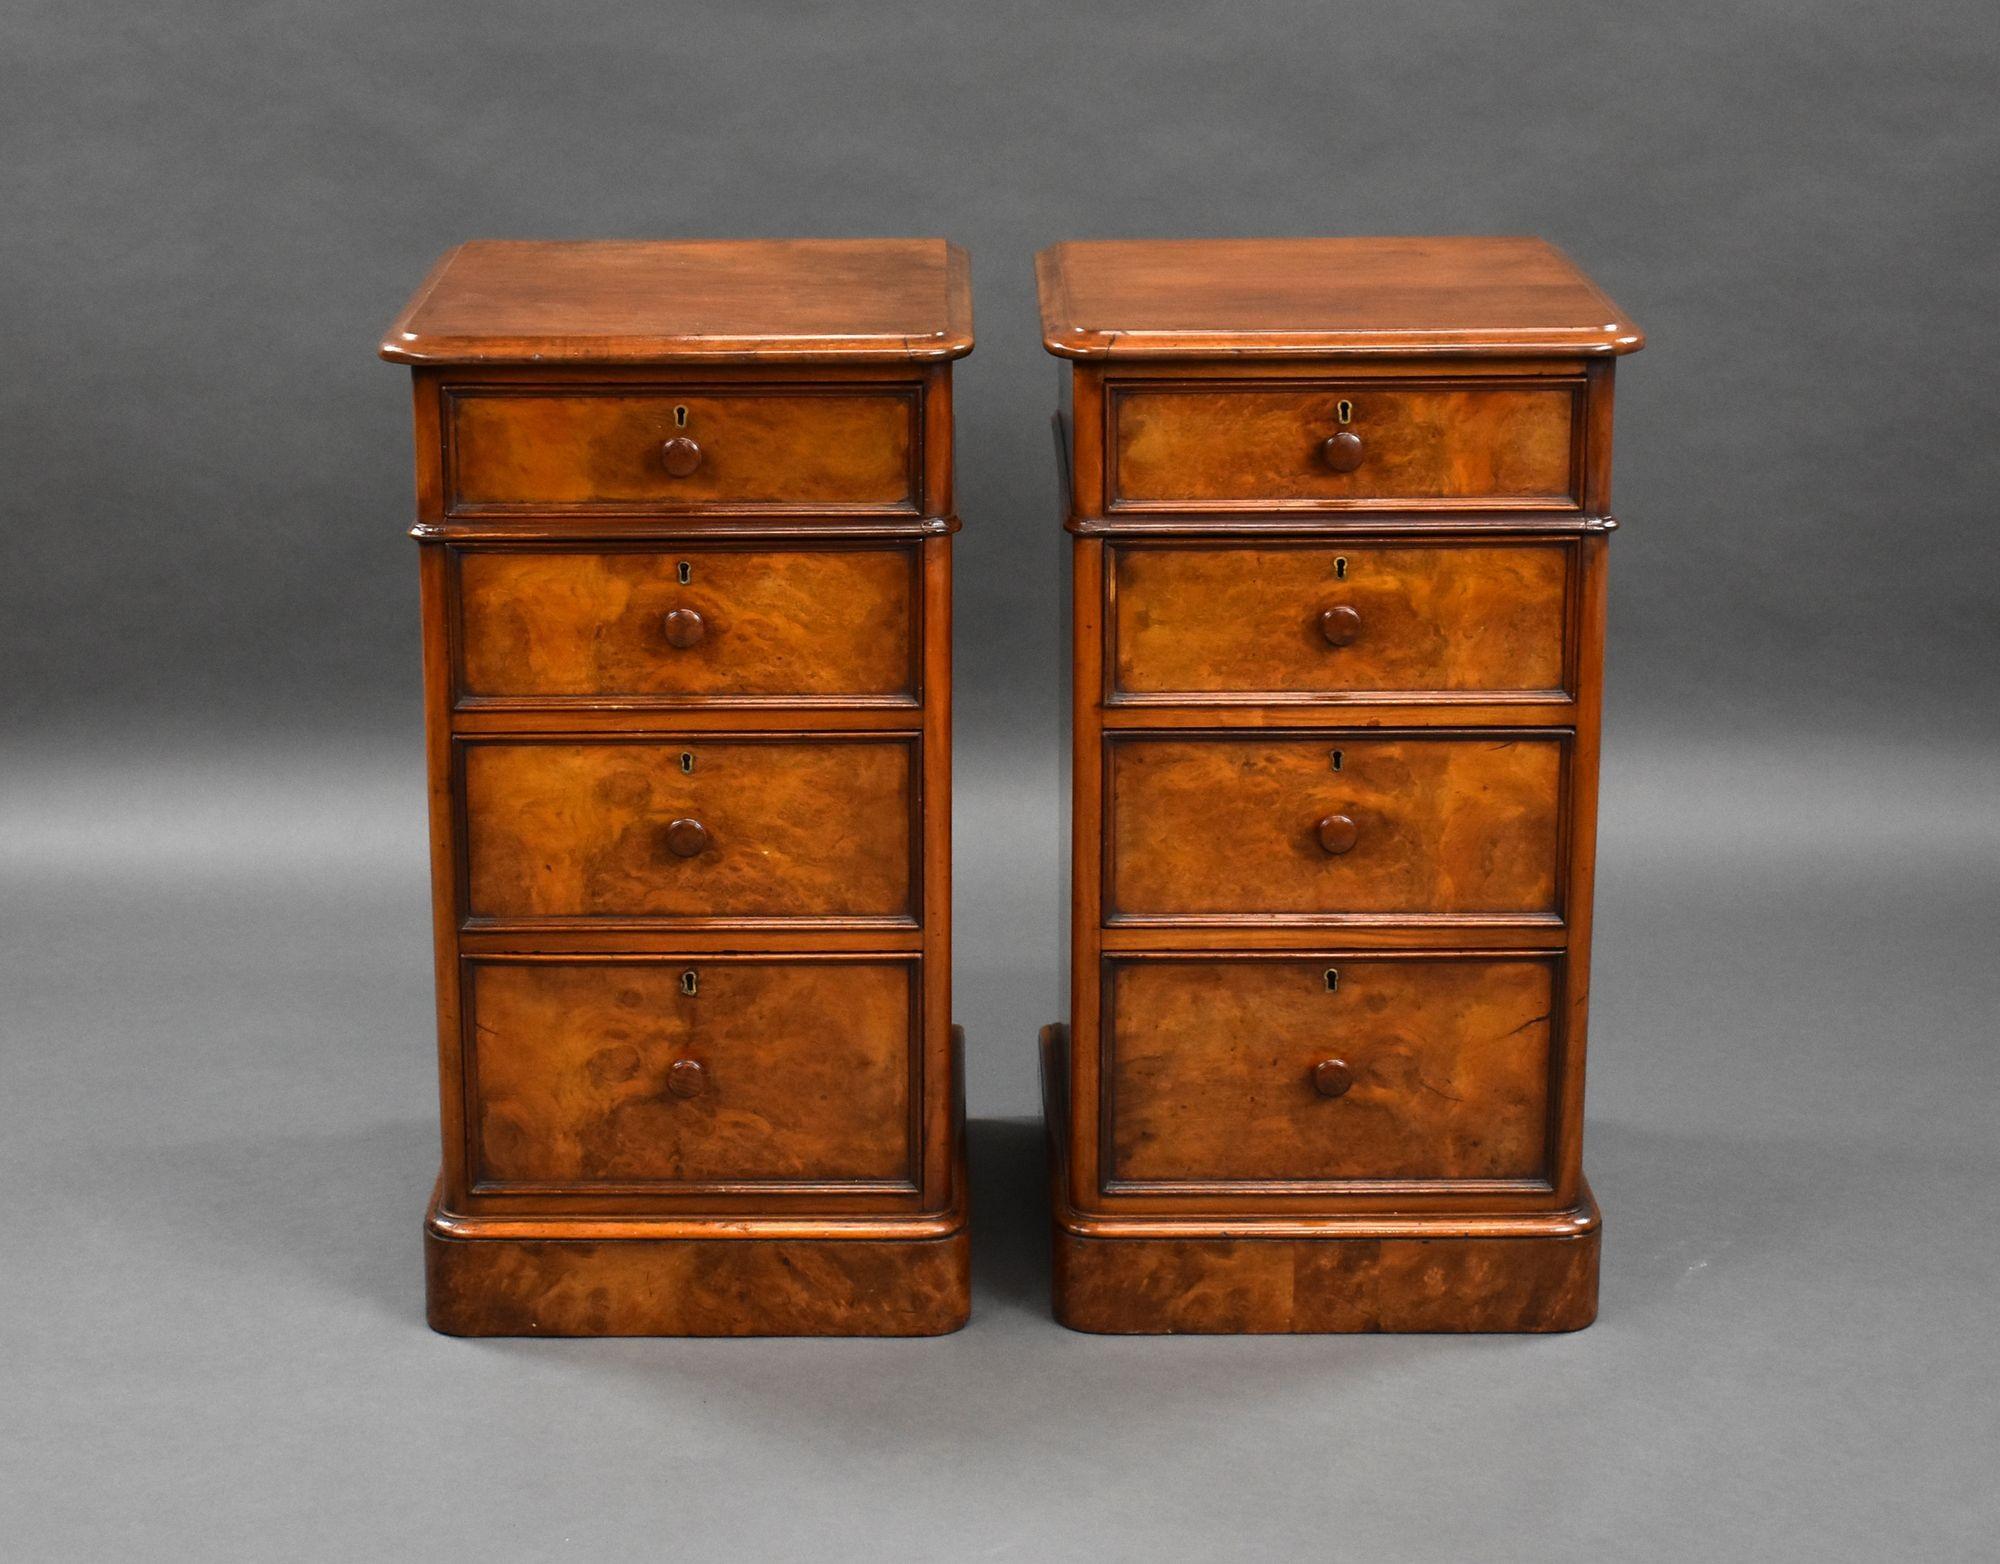 For sale is a good quality [pair of Victorian figured walnut bedside chests of drawers, each chest having an arrangement of four drawers, each with turned handles, both chests stand are raised on a plinth base and are in very good condition for